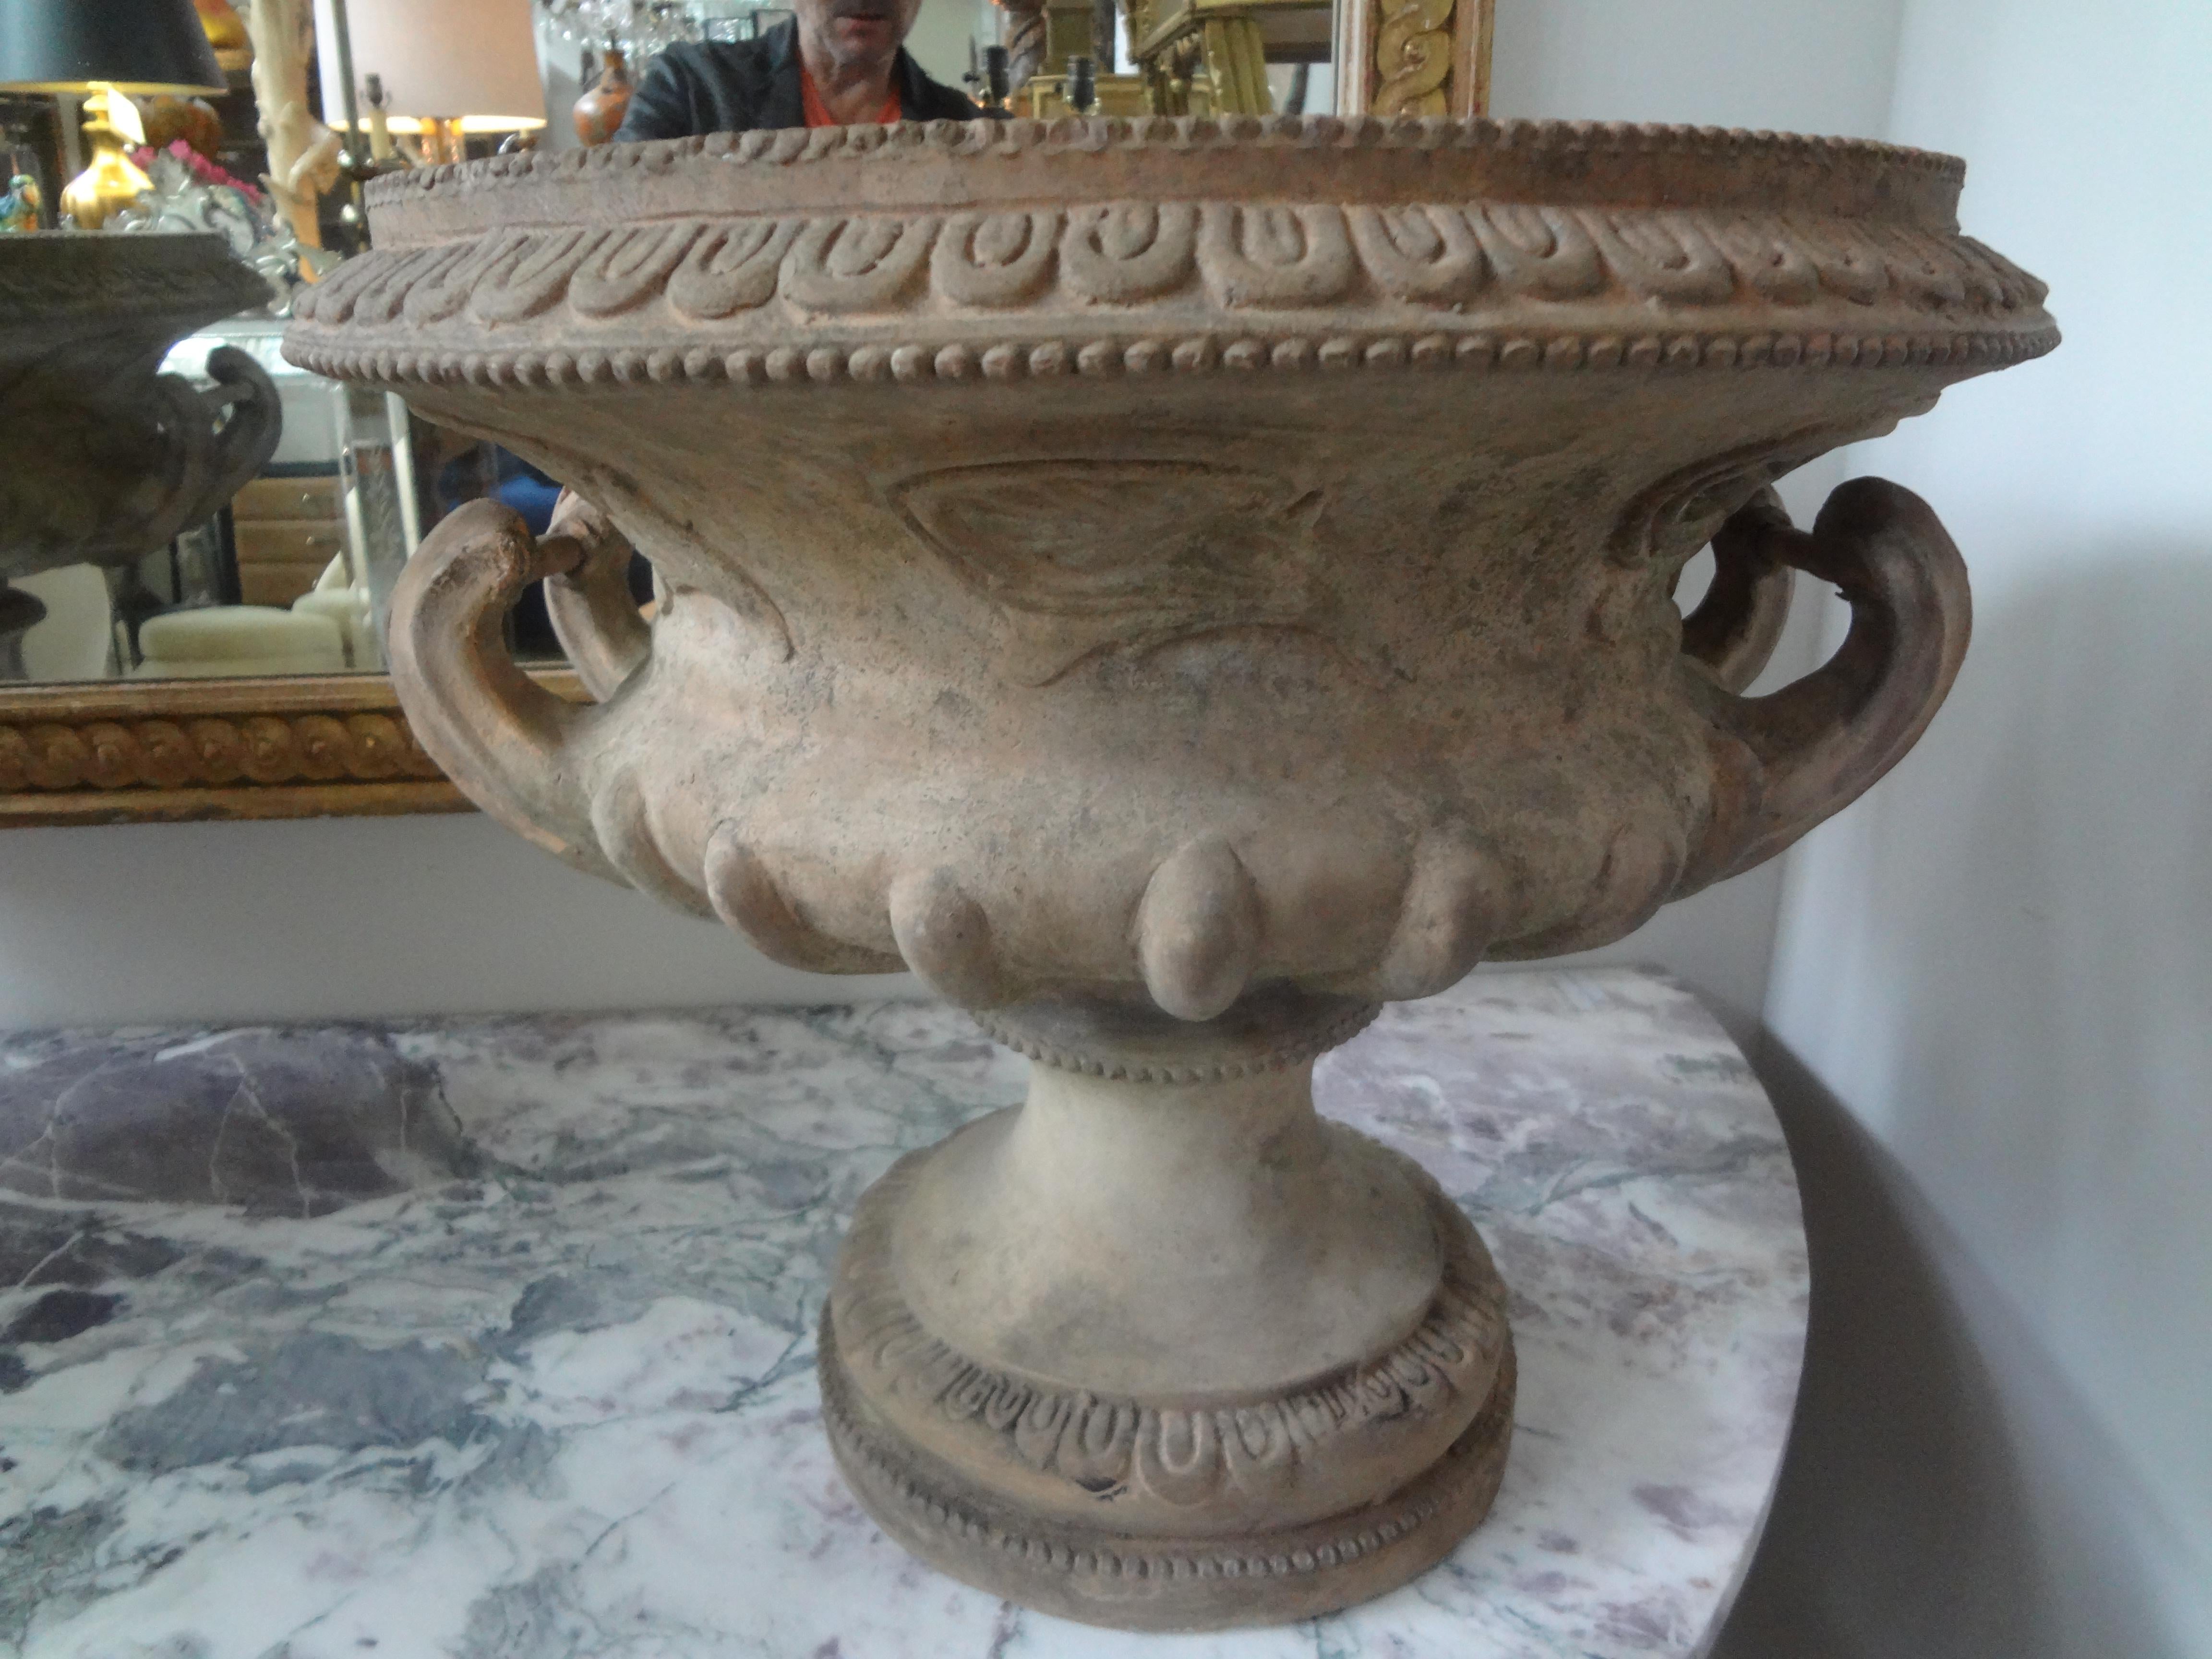 Pair of 18th century Italian terracotta urns.
This stunning pair of antique Italian Grecian style terra cotta urns, garden urns, planters or jardinieres have beautiful detailing with side handles. Previous minor restoration.